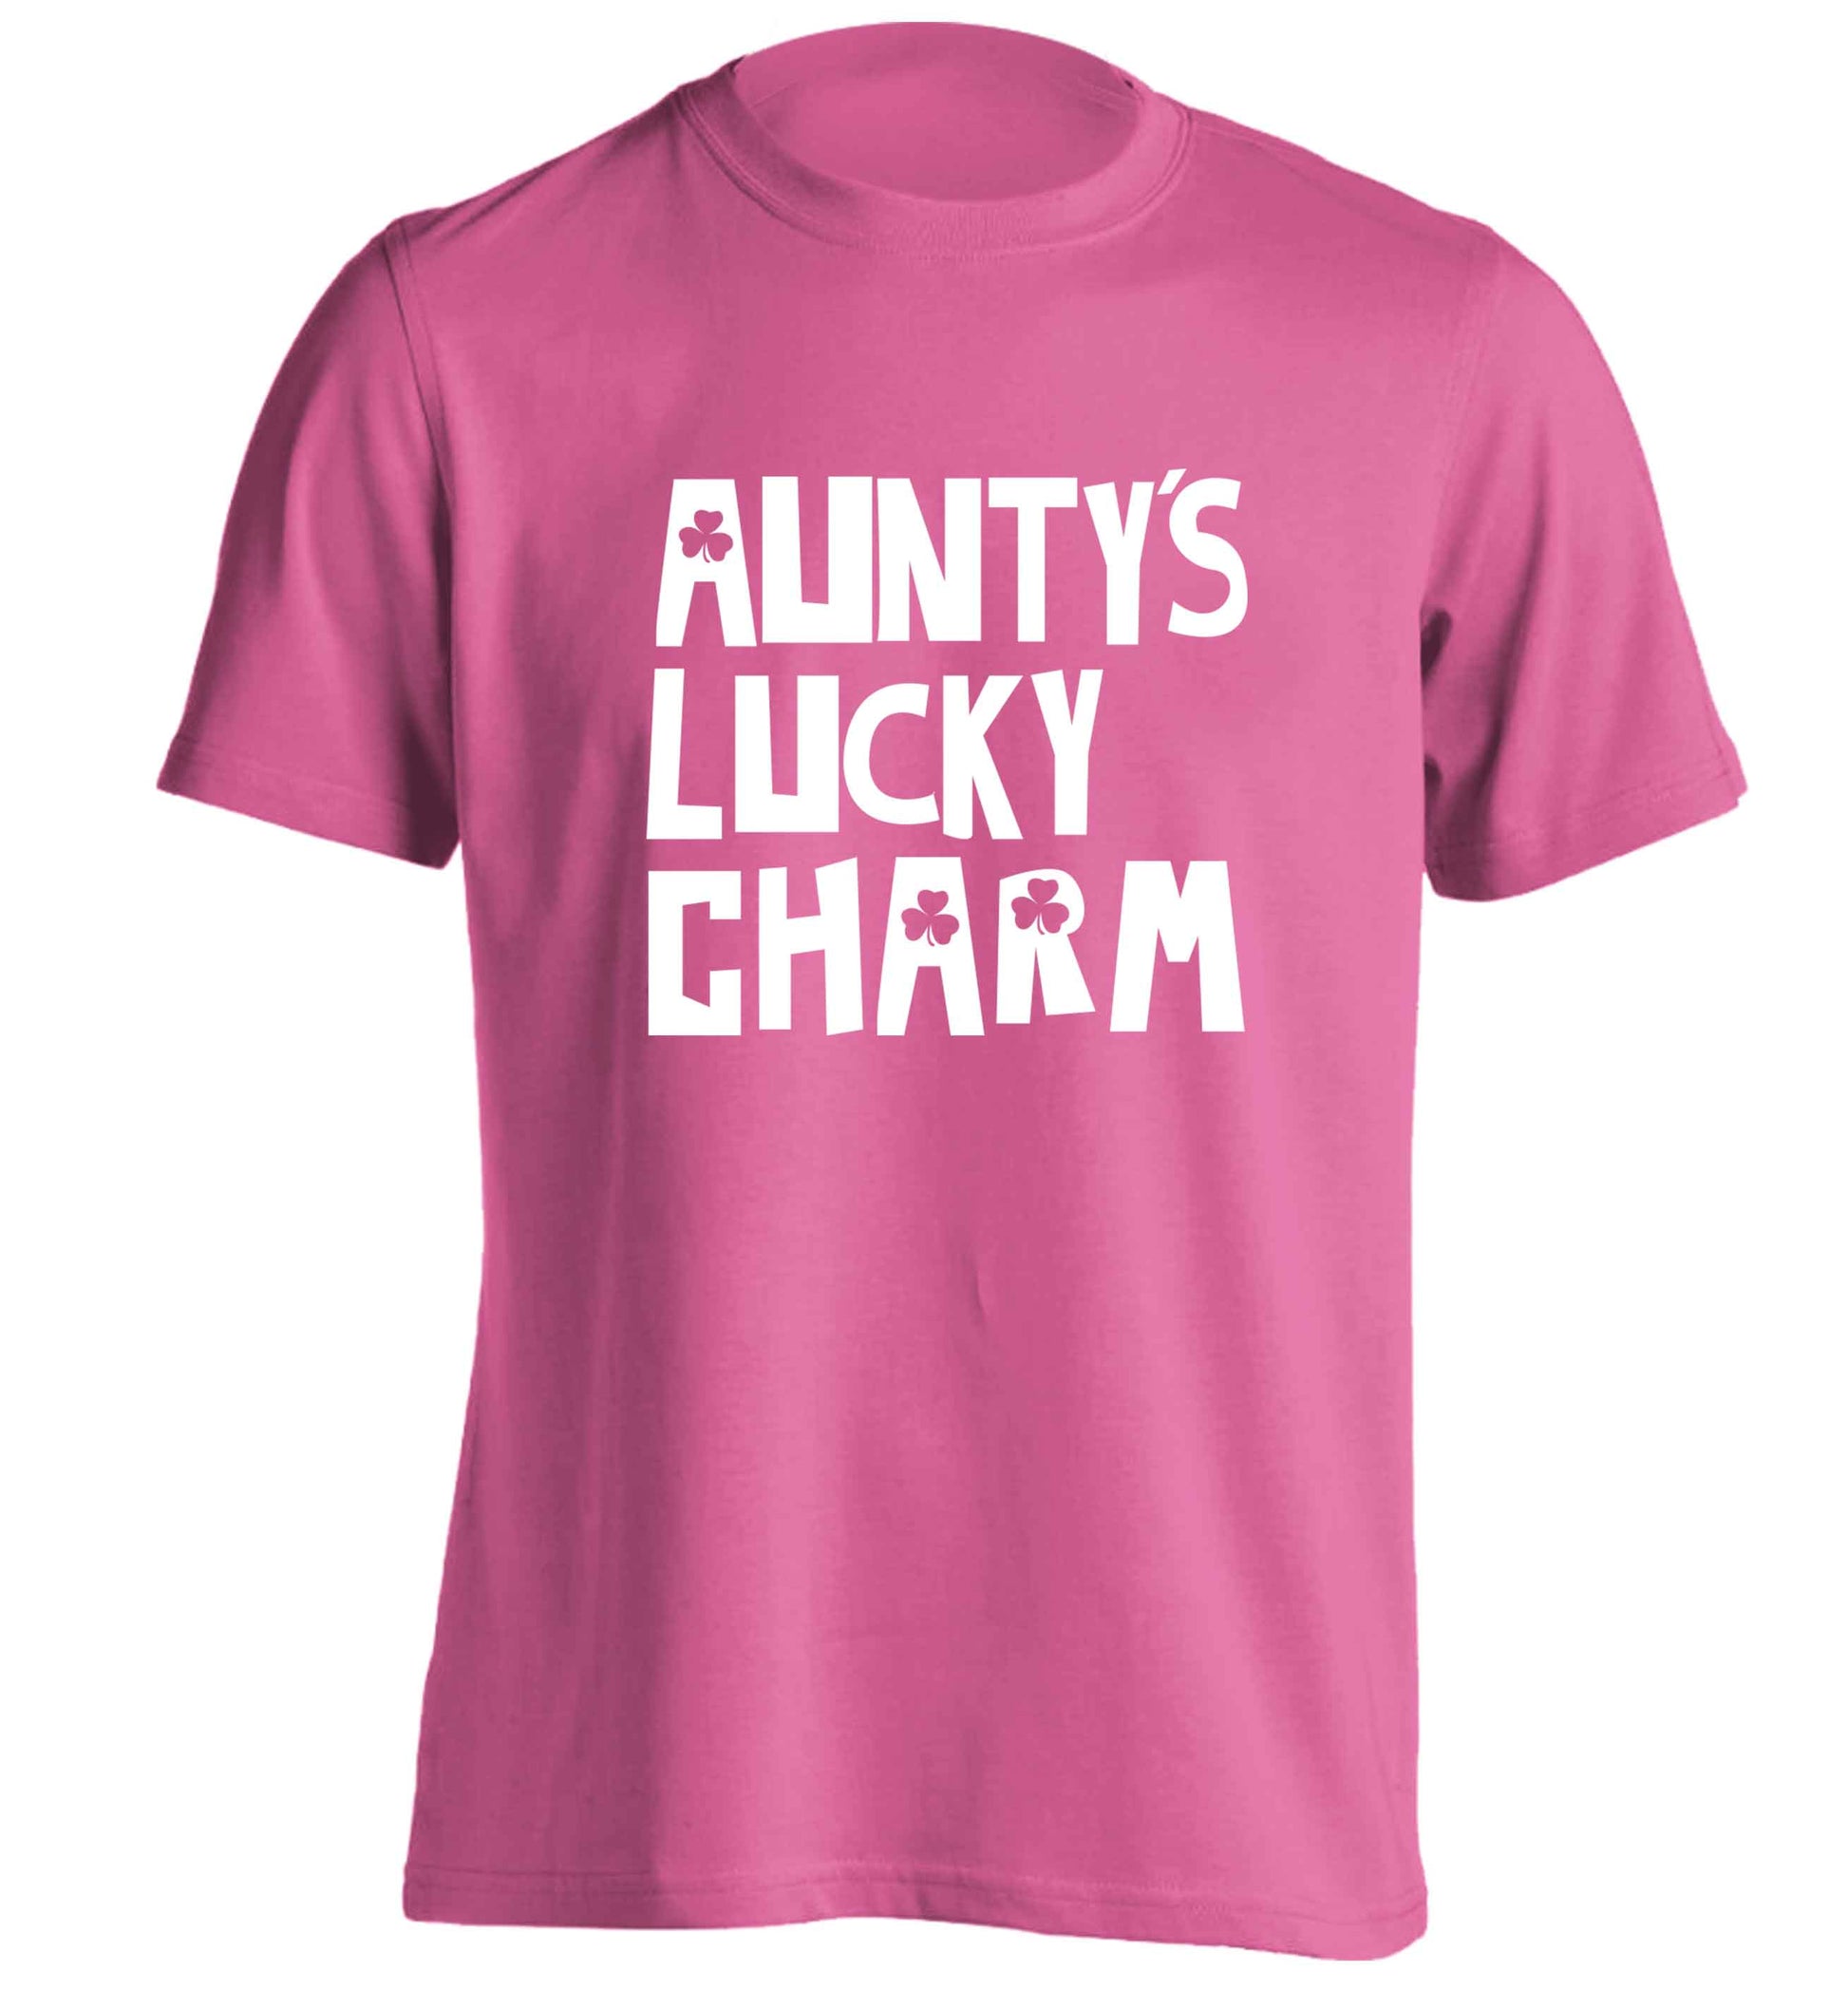 Aunty's lucky charm adults unisex pink Tshirt 2XL